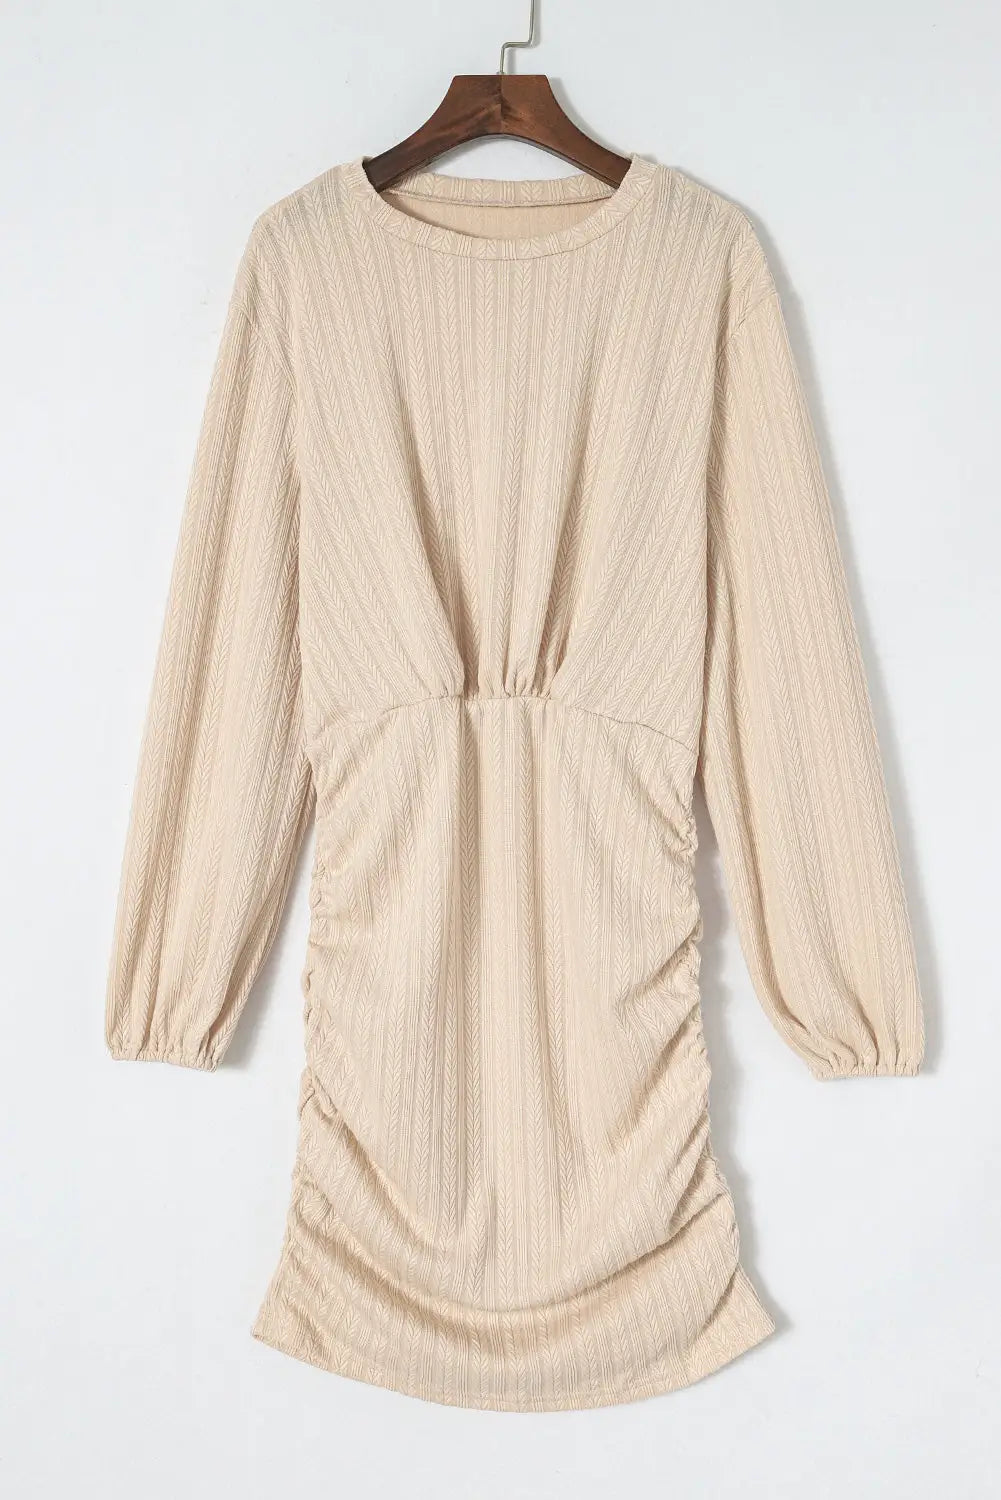 Apricot tactile texture ruched side bubble sleeve knit dress